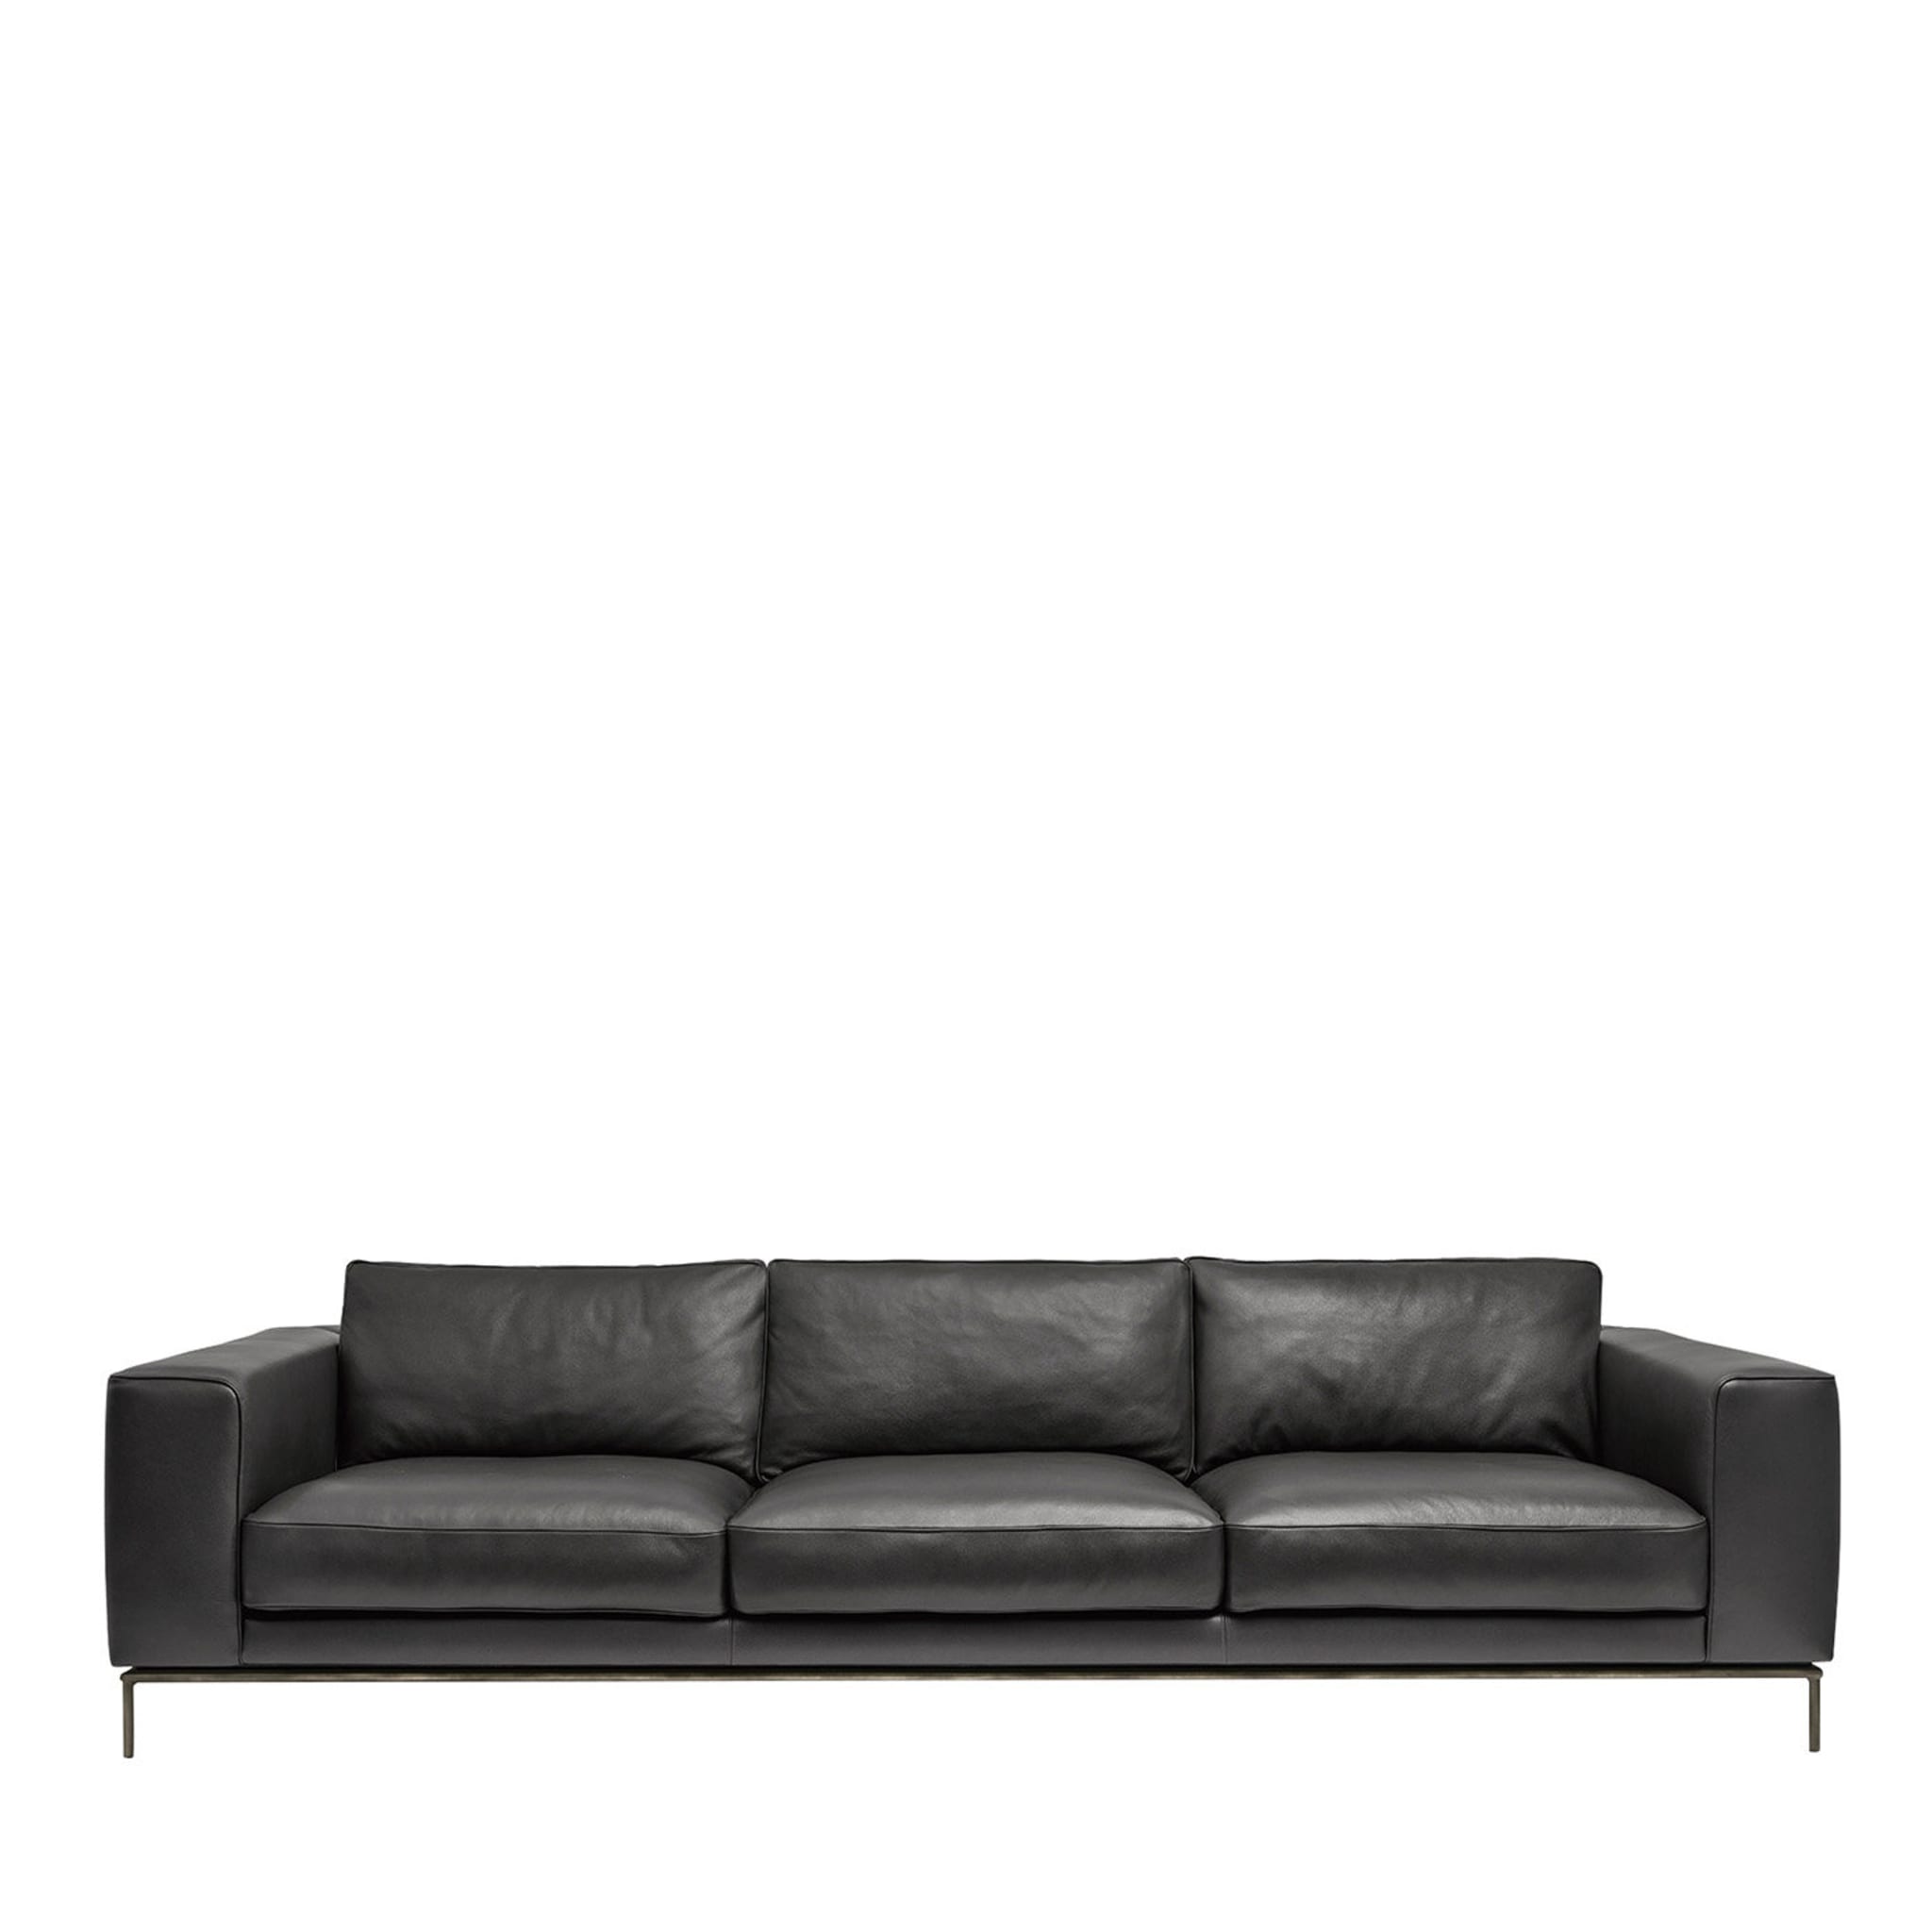 Roger Black Leather Sofa - Main view